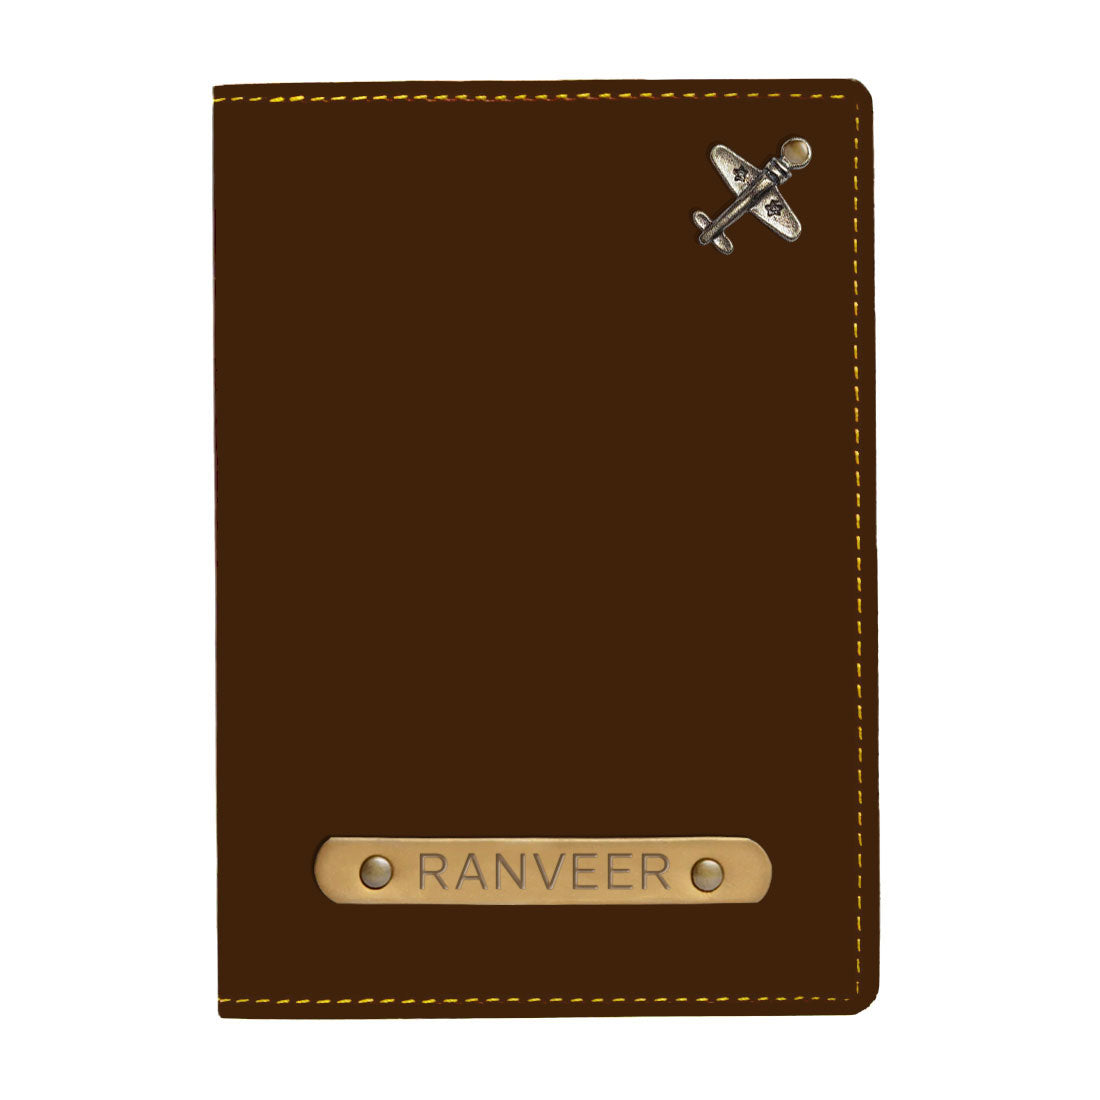 Personalized Passport Holder with Name and Charms - Airplane